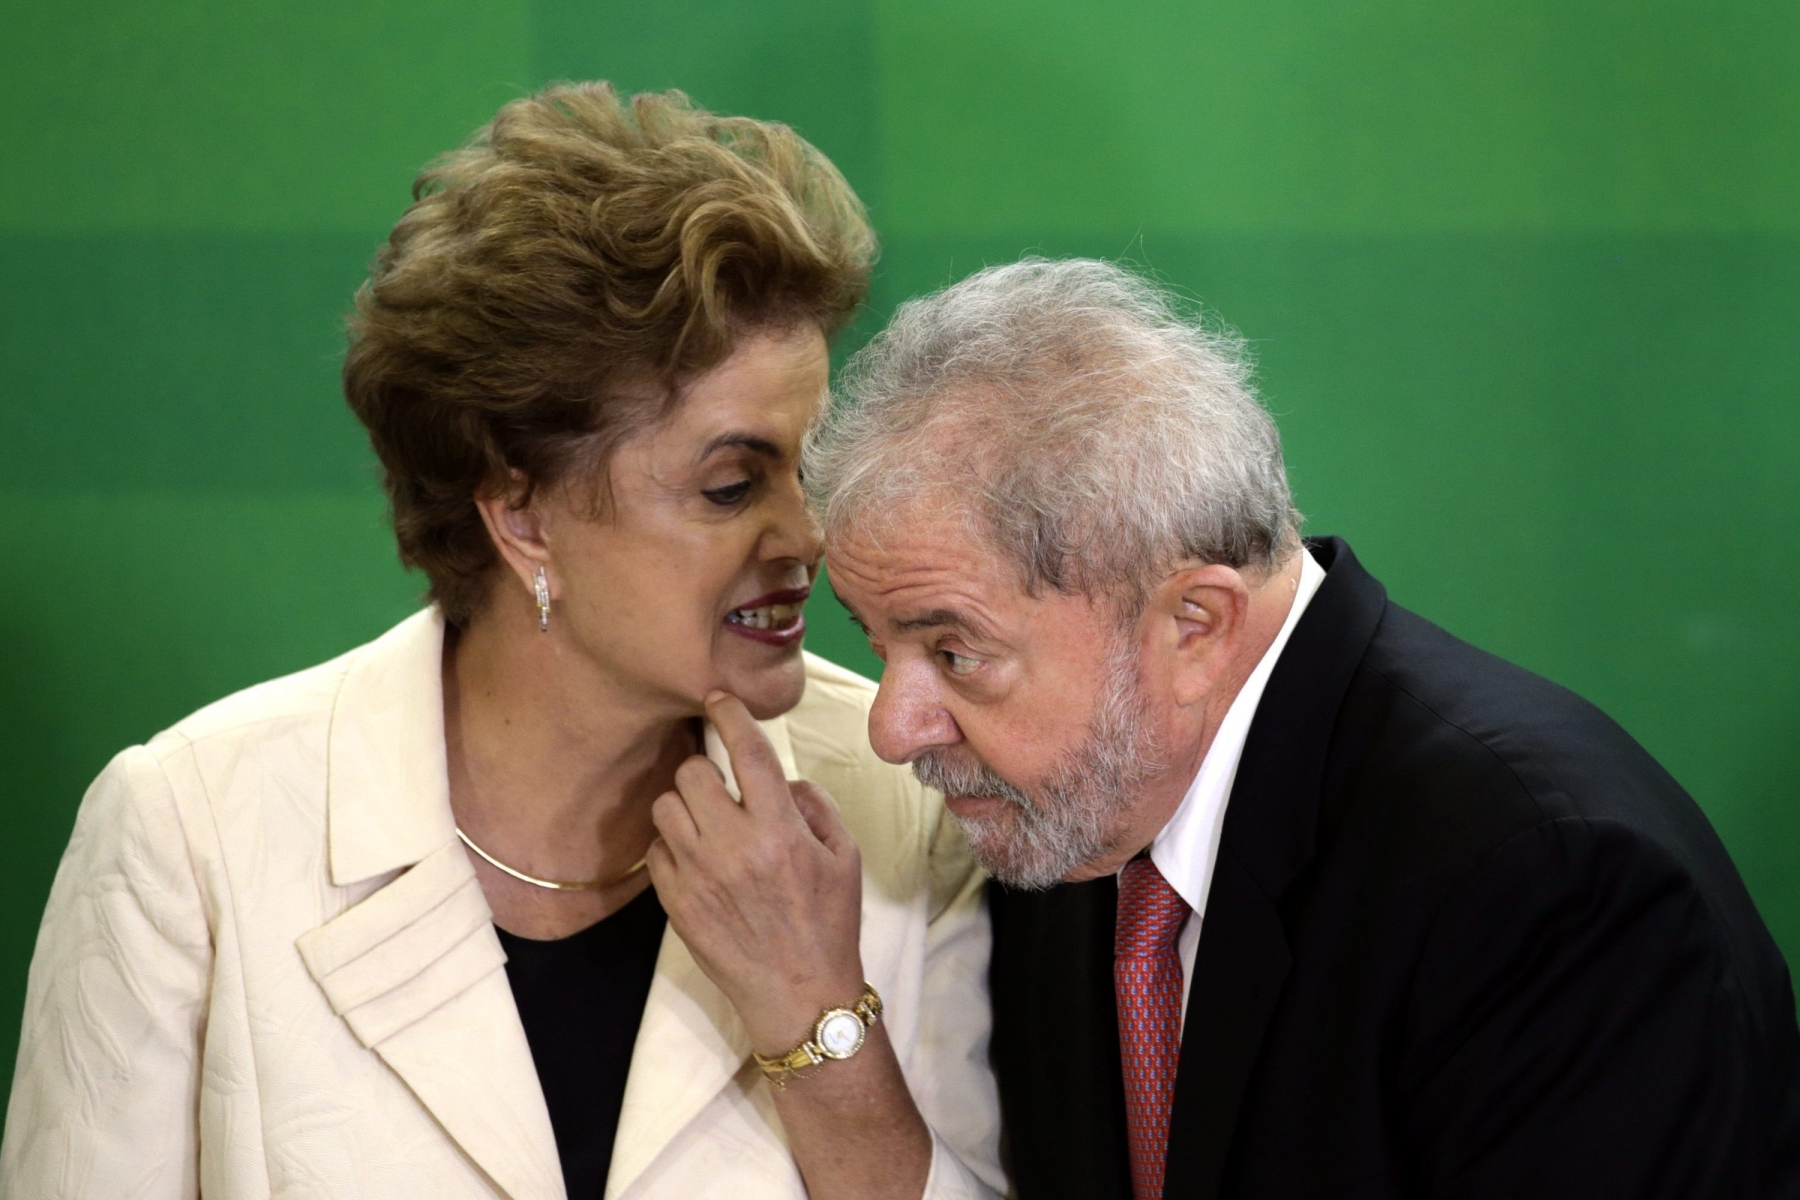 epa05216371 President of Brazil, Dilma Rousseff (L) with her predecessor, Former President of Brazil, Luiz Inacio Lula da Silva (R), as she swears him in as the new Chief of Staff Minister, in a ceremony held an Planalto Palace in Brasilia, Brazil, 17 March 2016. Silva now has legal immunity in a corruption investigation, which has caused protests across several cities in Brazil. Rousseff said 'The current circumstances give me the great opportunity to bring the Government to the greatest political leader of this country' at the ceremony, which was attended by hundreds of parliamentarians, both pro-Government and opposition, and members of social movements.  EPA/FERNANDO BIZERRA JR BRAZIL GOVERNMENT CORRUPTION